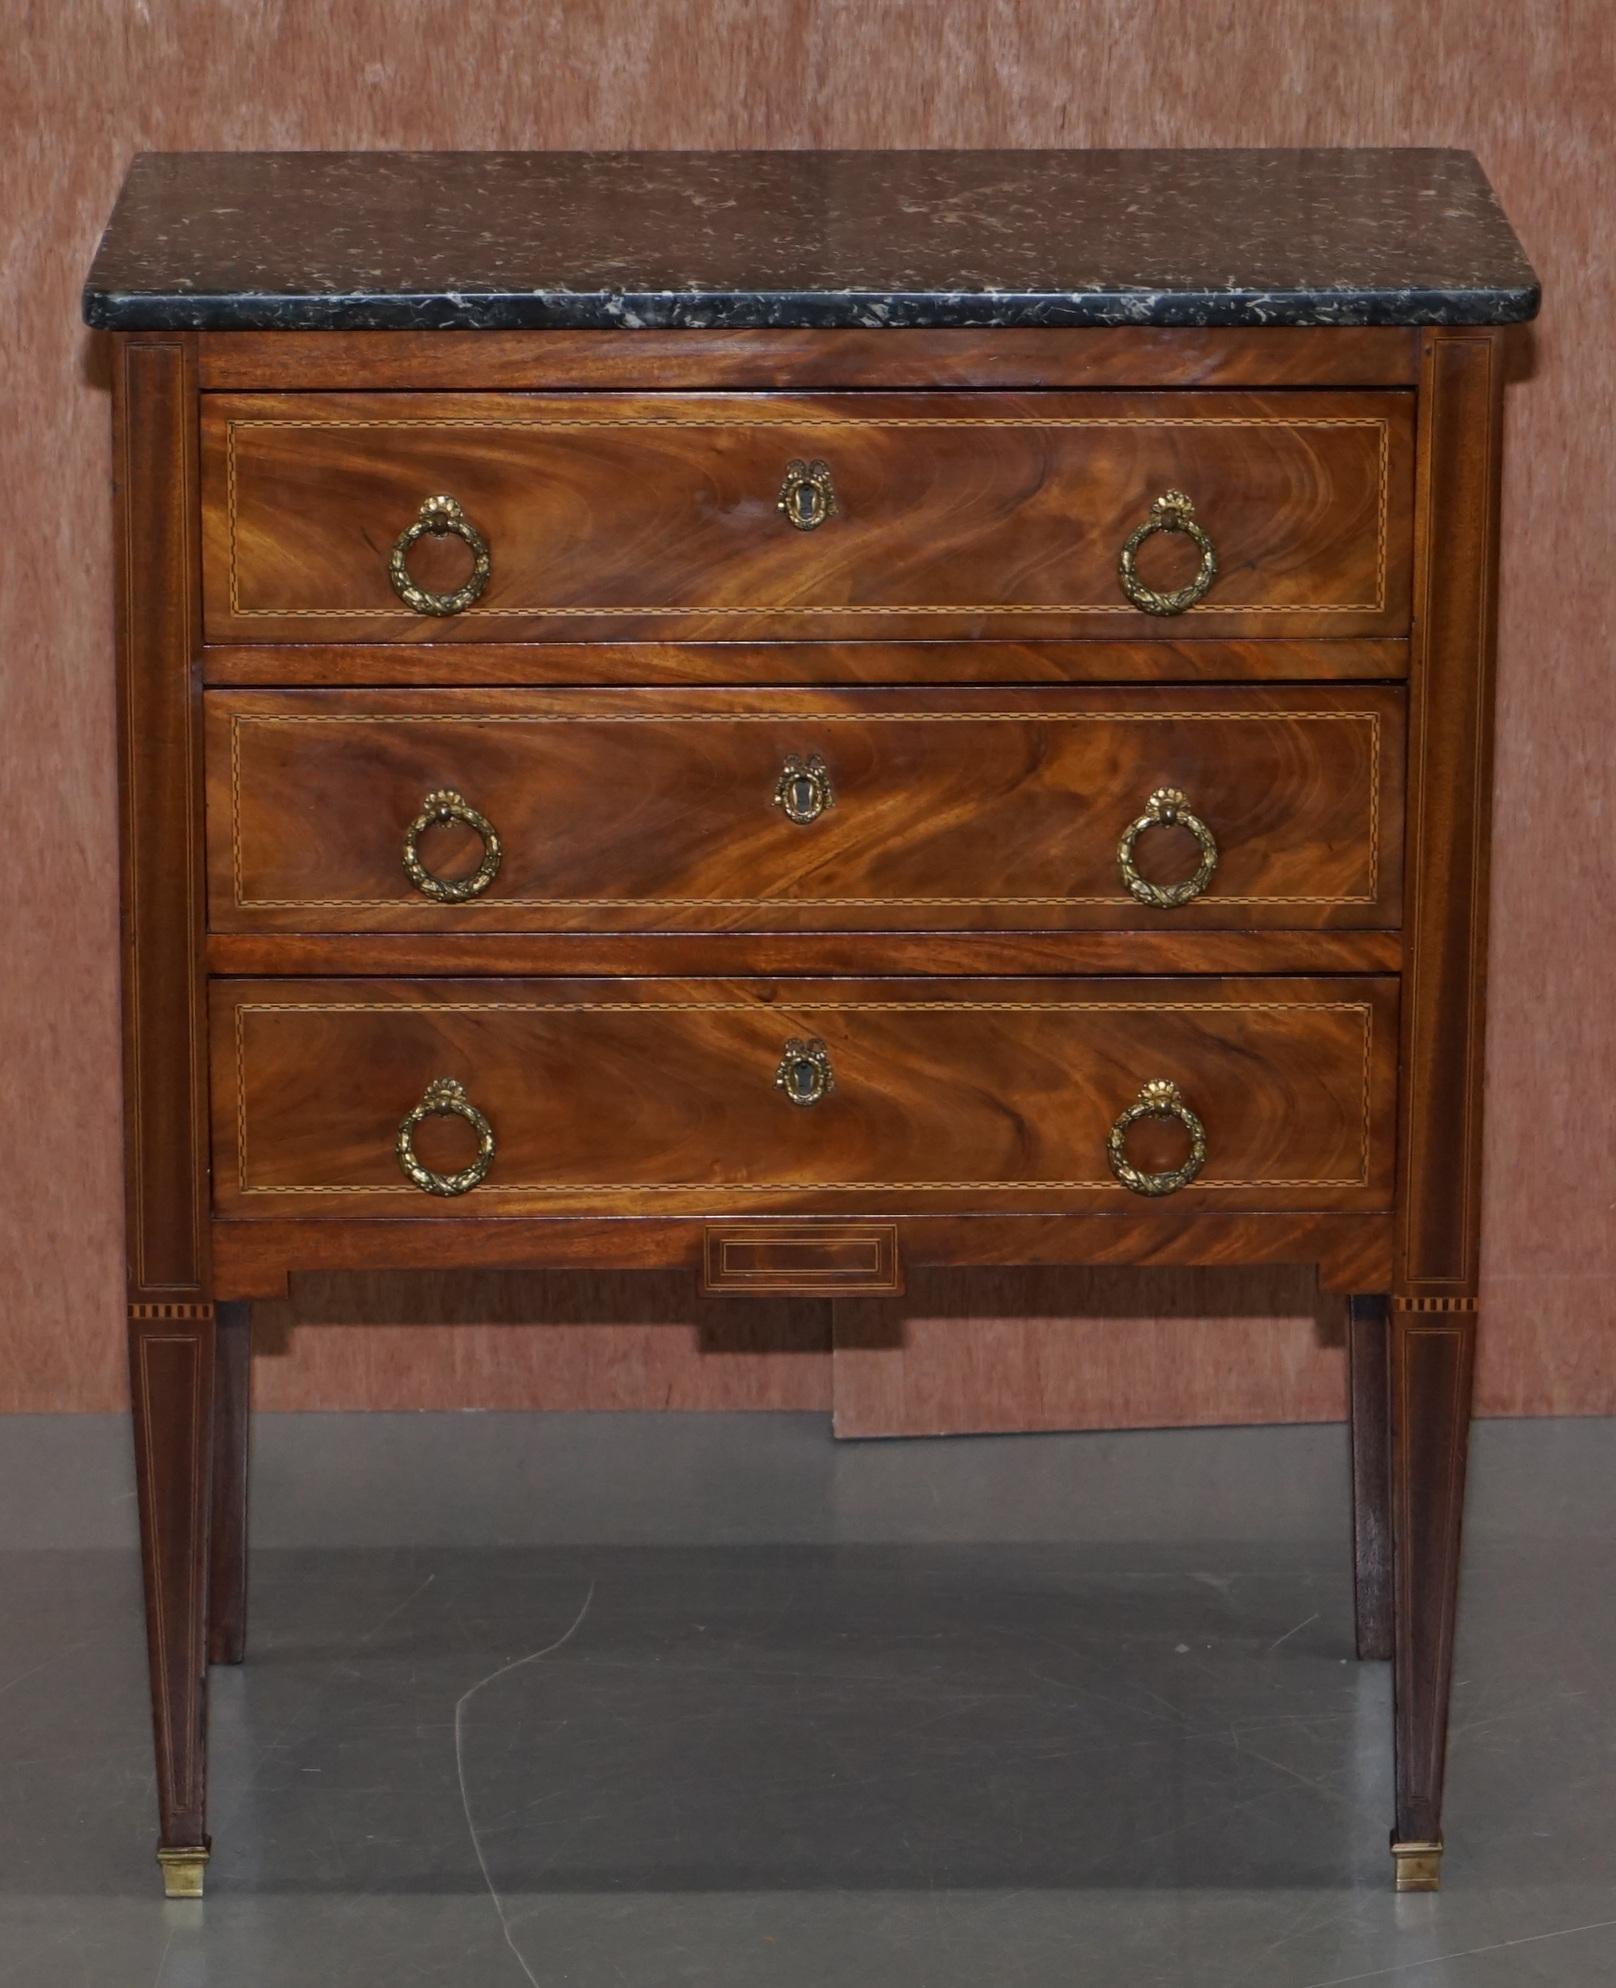 We are delighted to offer for sale this stunning neoclassical Cuban mahogany side table with marble top, circa 1860

A very good looking and well made piece. The timber is Cuban mahogany, it has a glorious patina, the tops are Italian marble

We